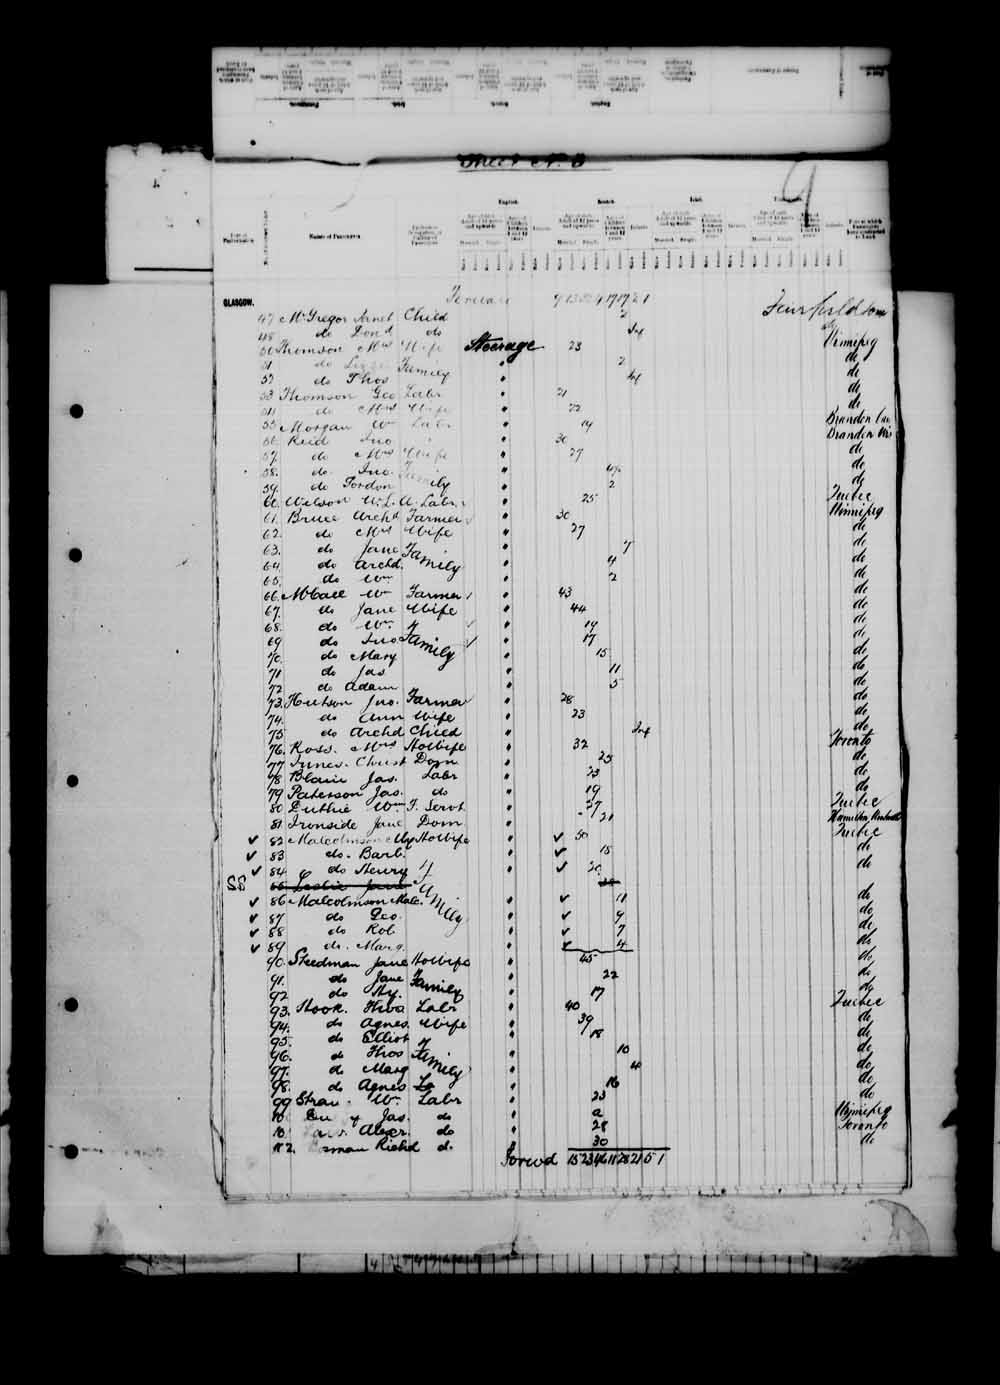 Digitized page of Passenger Lists for Image No.: e003542769